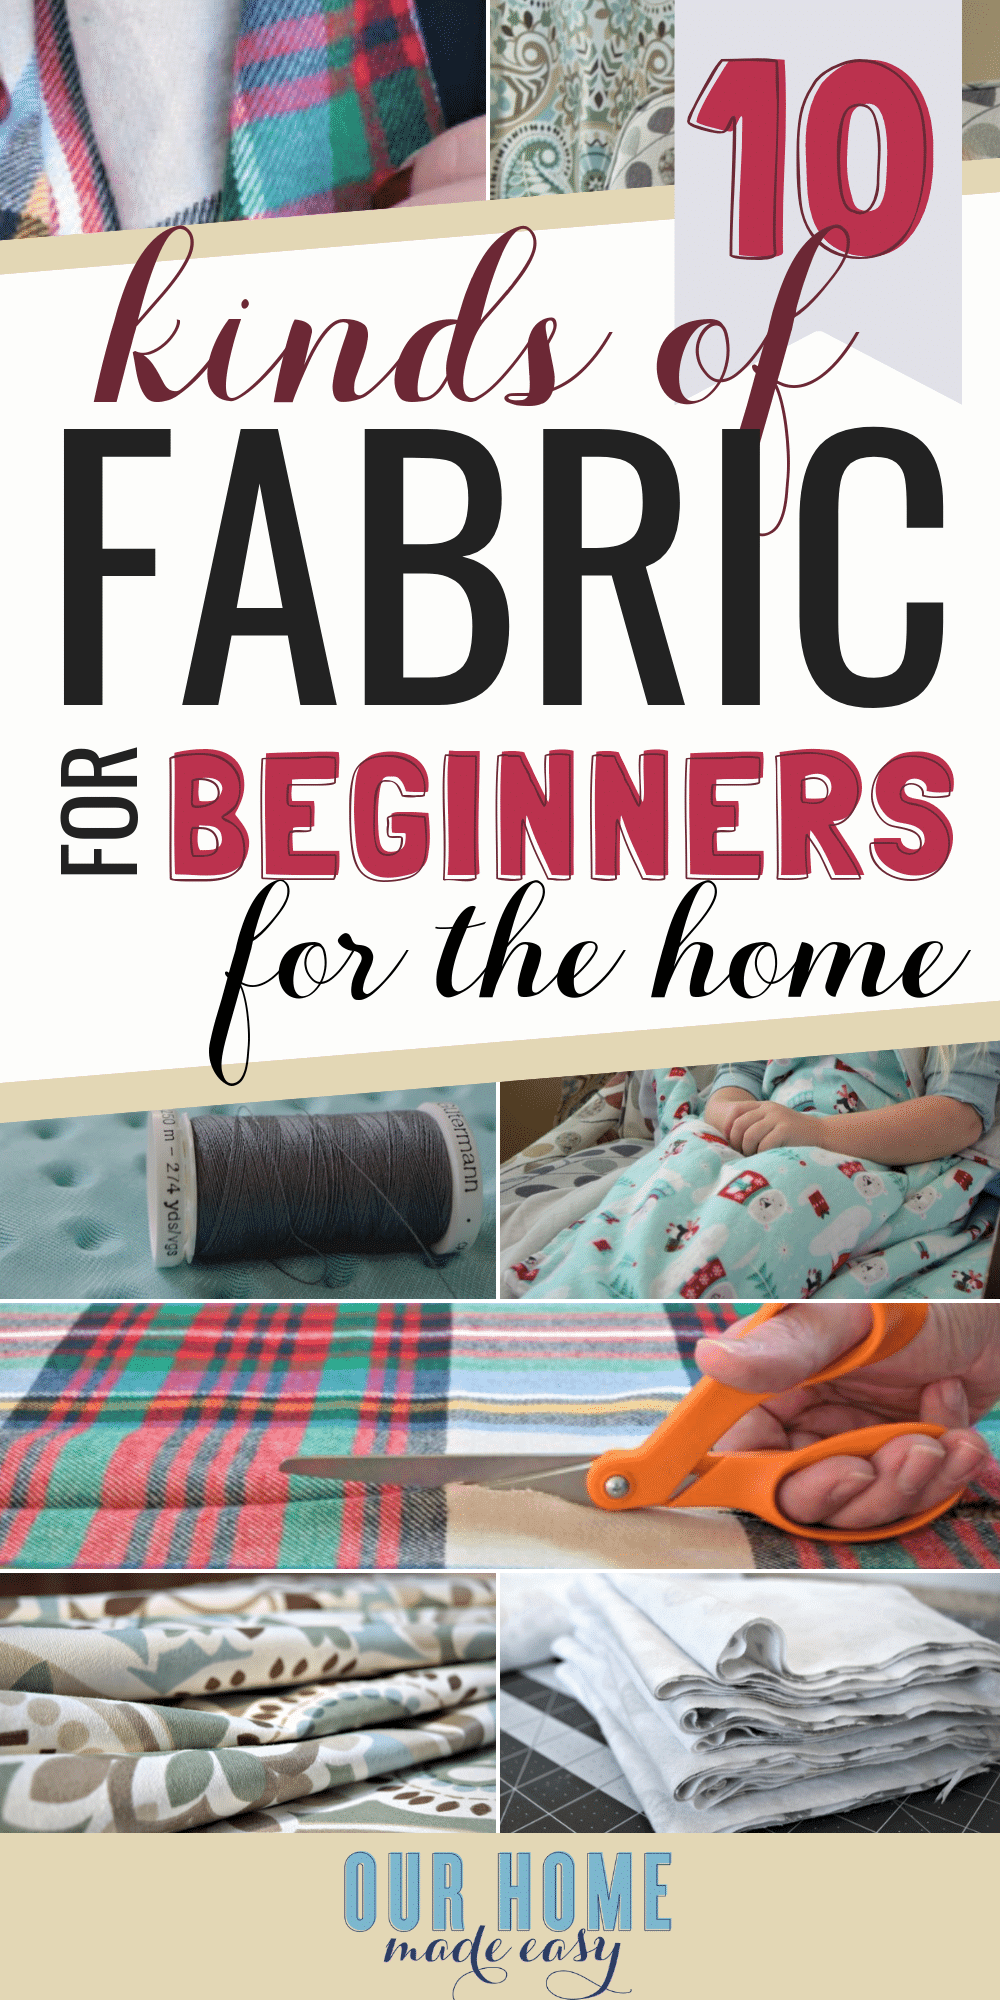 10 Kinds of Fabric for Beginners: the beginners fabric guide has all you need to know about fabric for your DIY projects